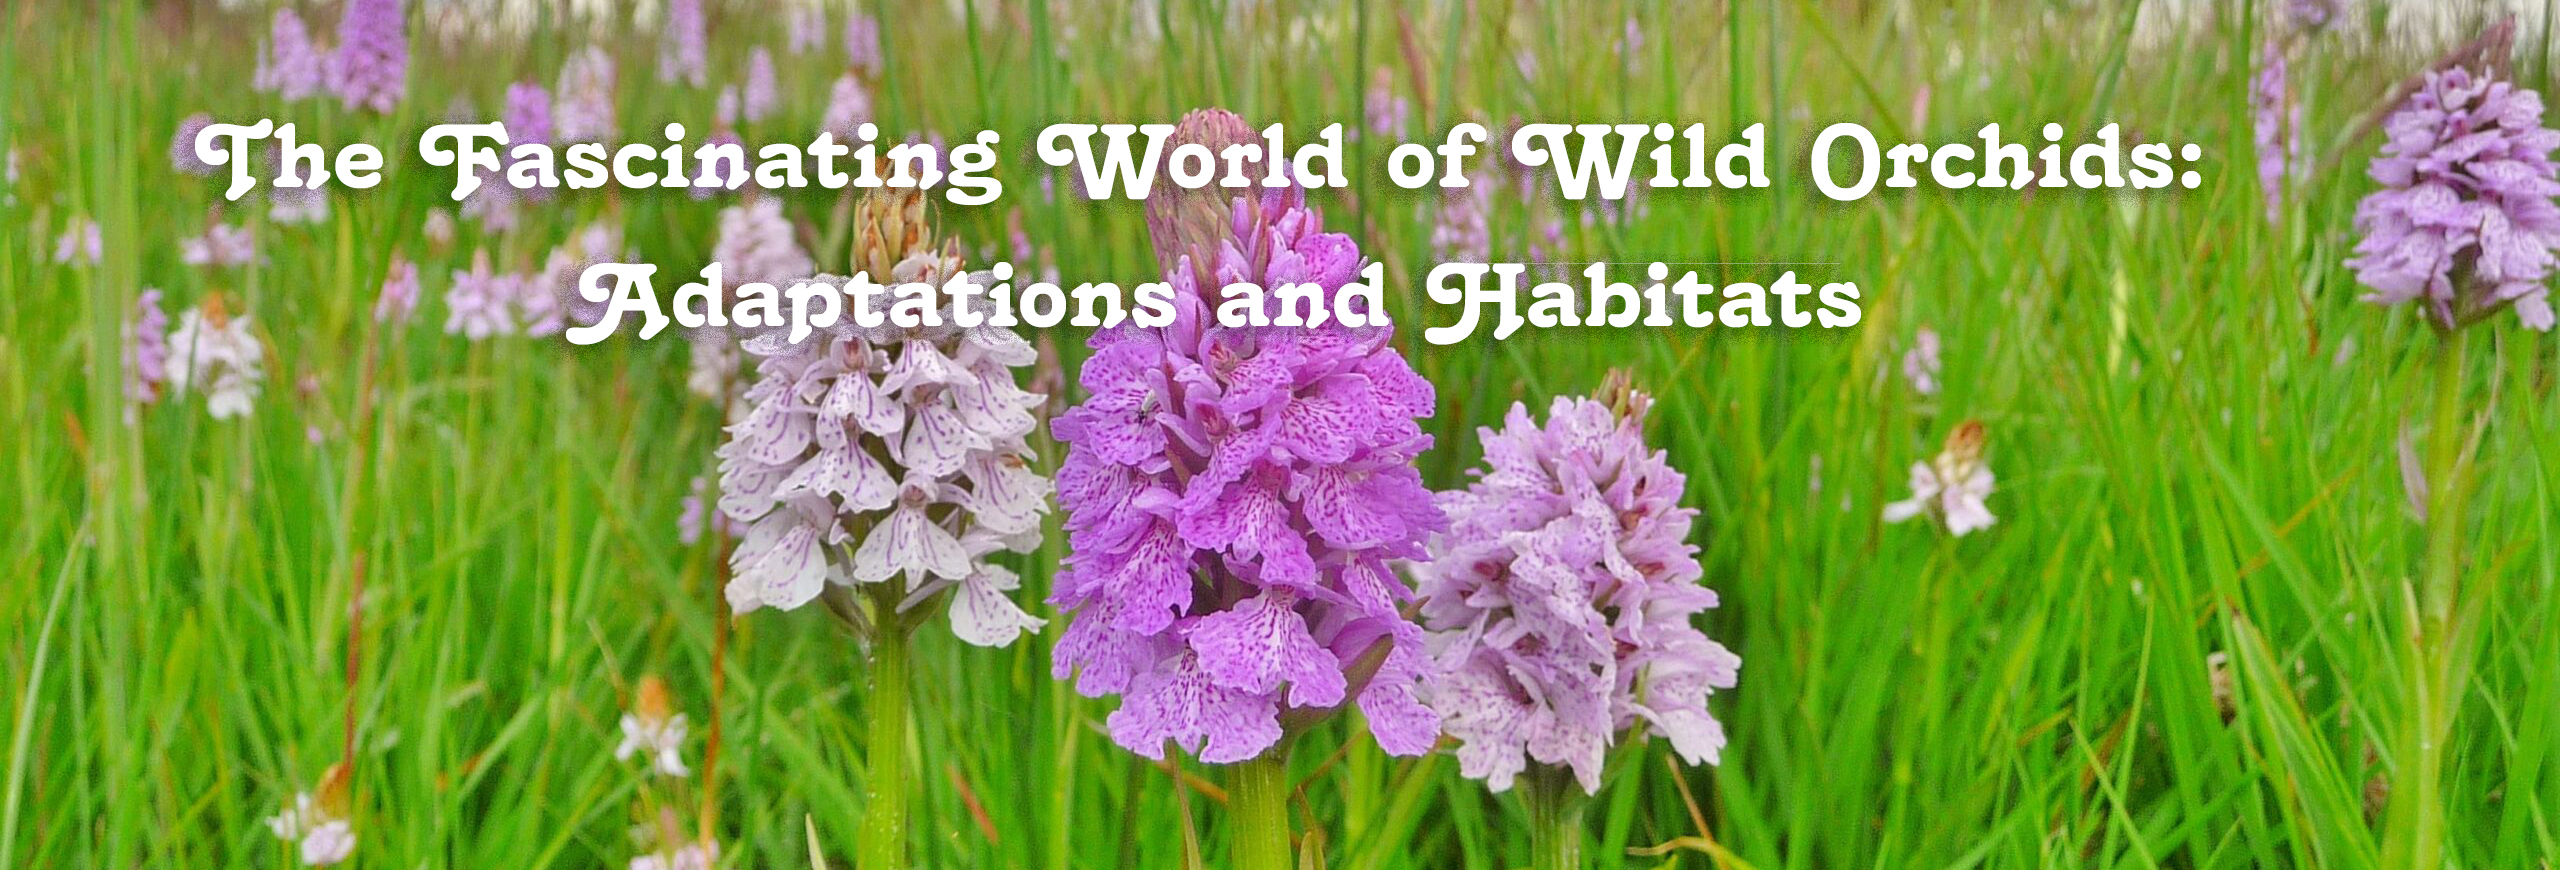 The Fascinating World of Wild Orchids: Adaptations and Habitats